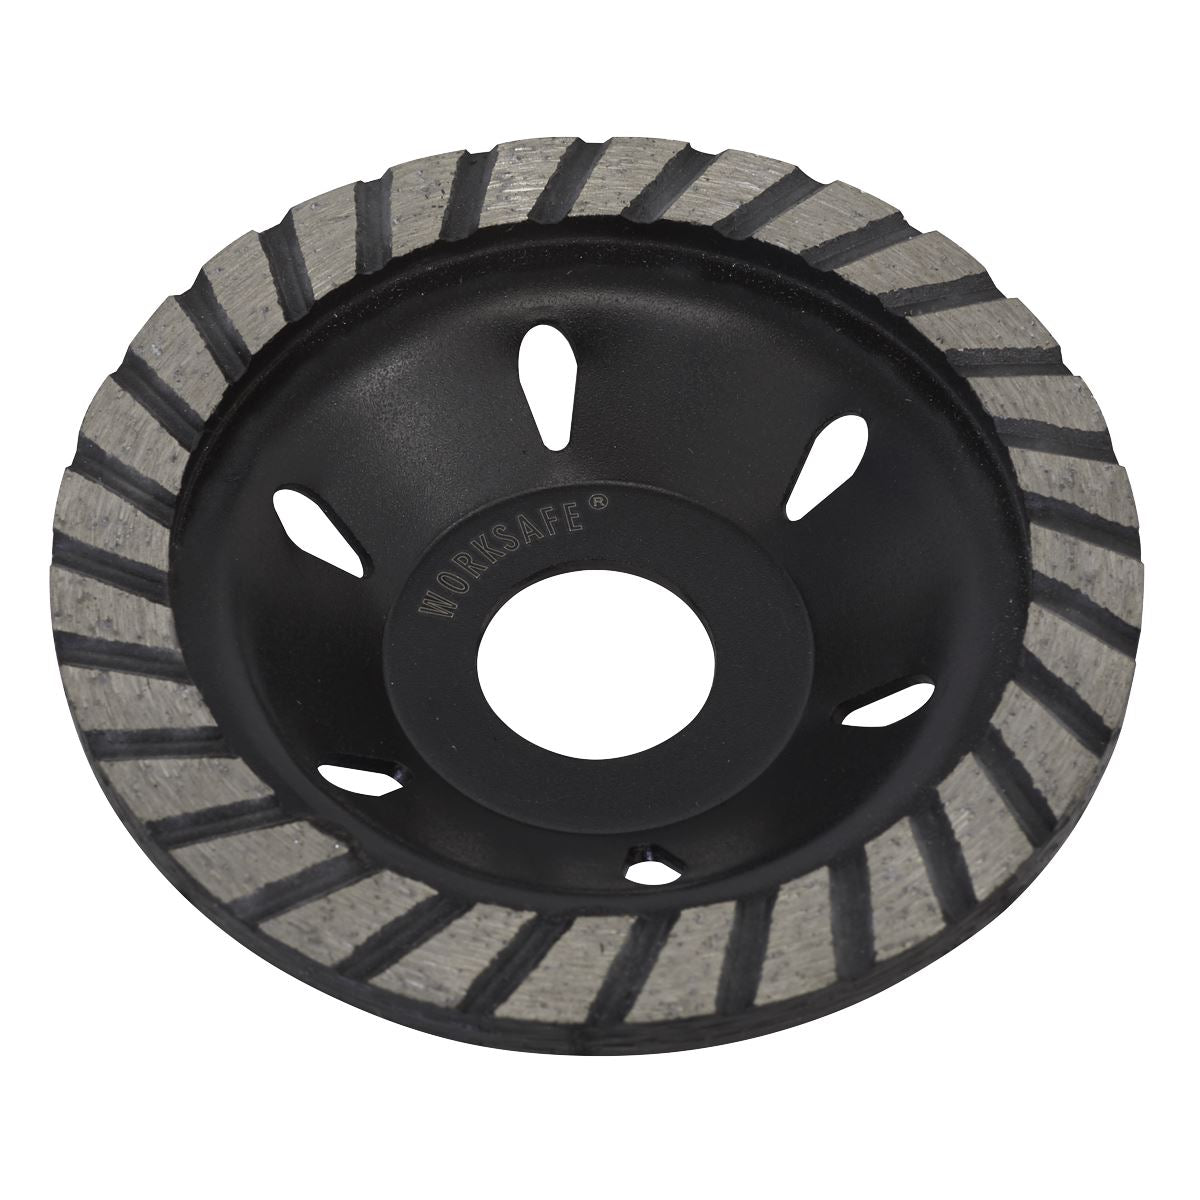 Worksafe by Sealey Diamond Cup Grinding Disc Ø105 x 22mm